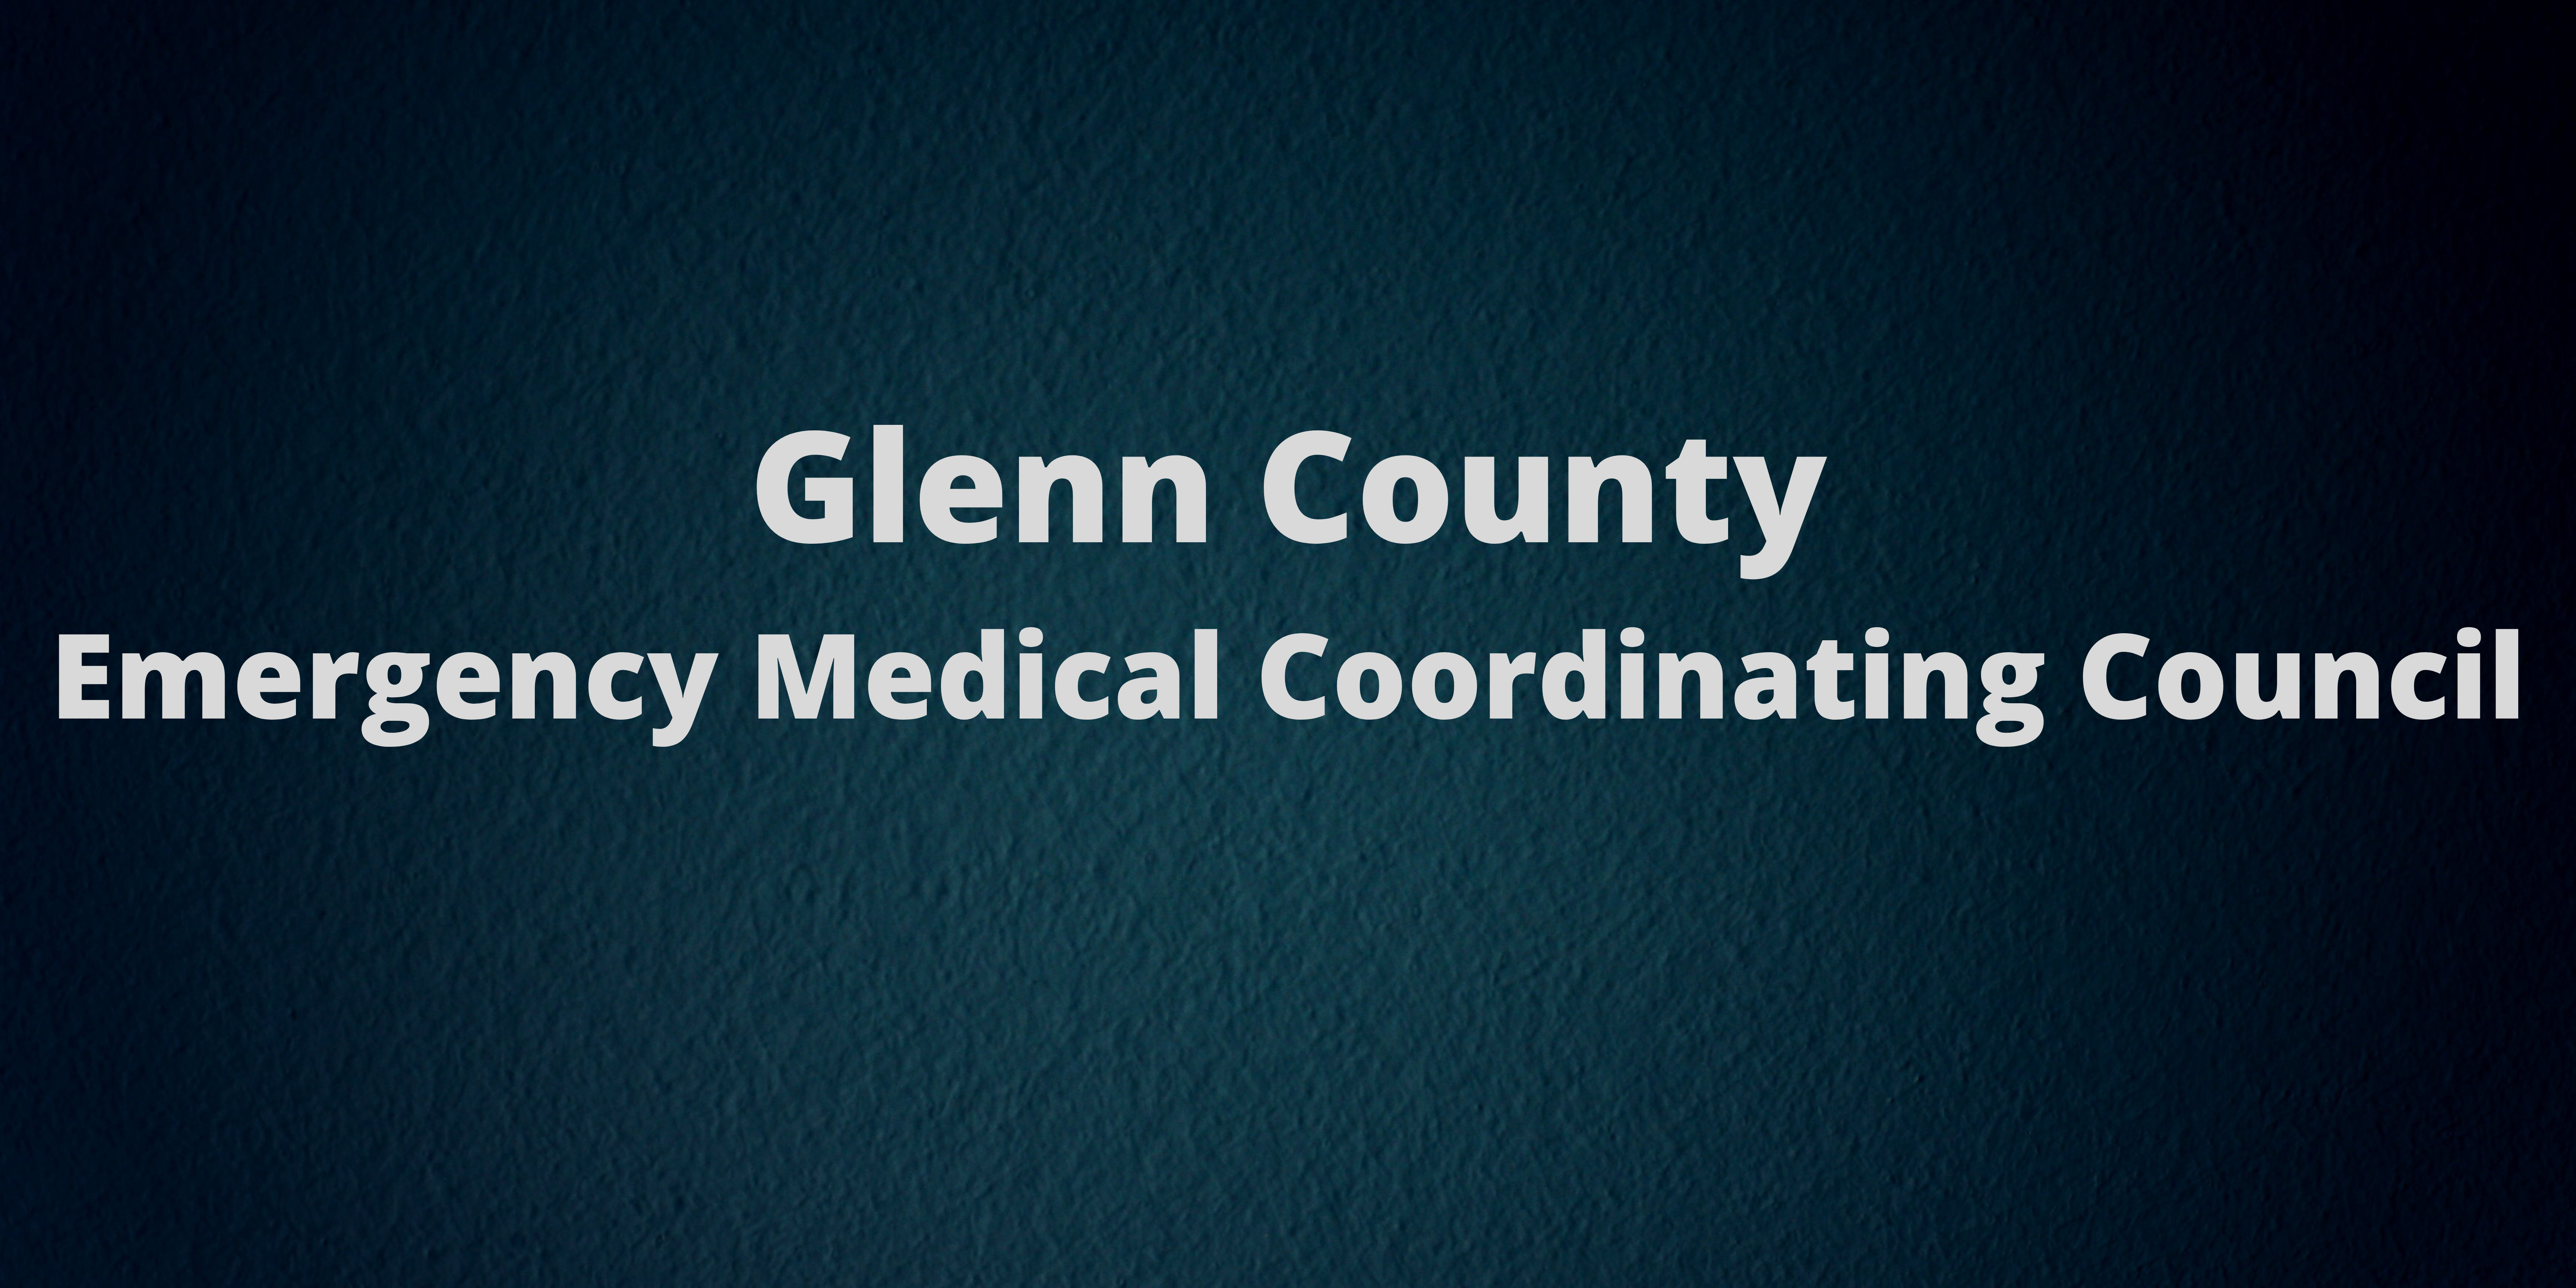 Emergency Medical Coordinating Council